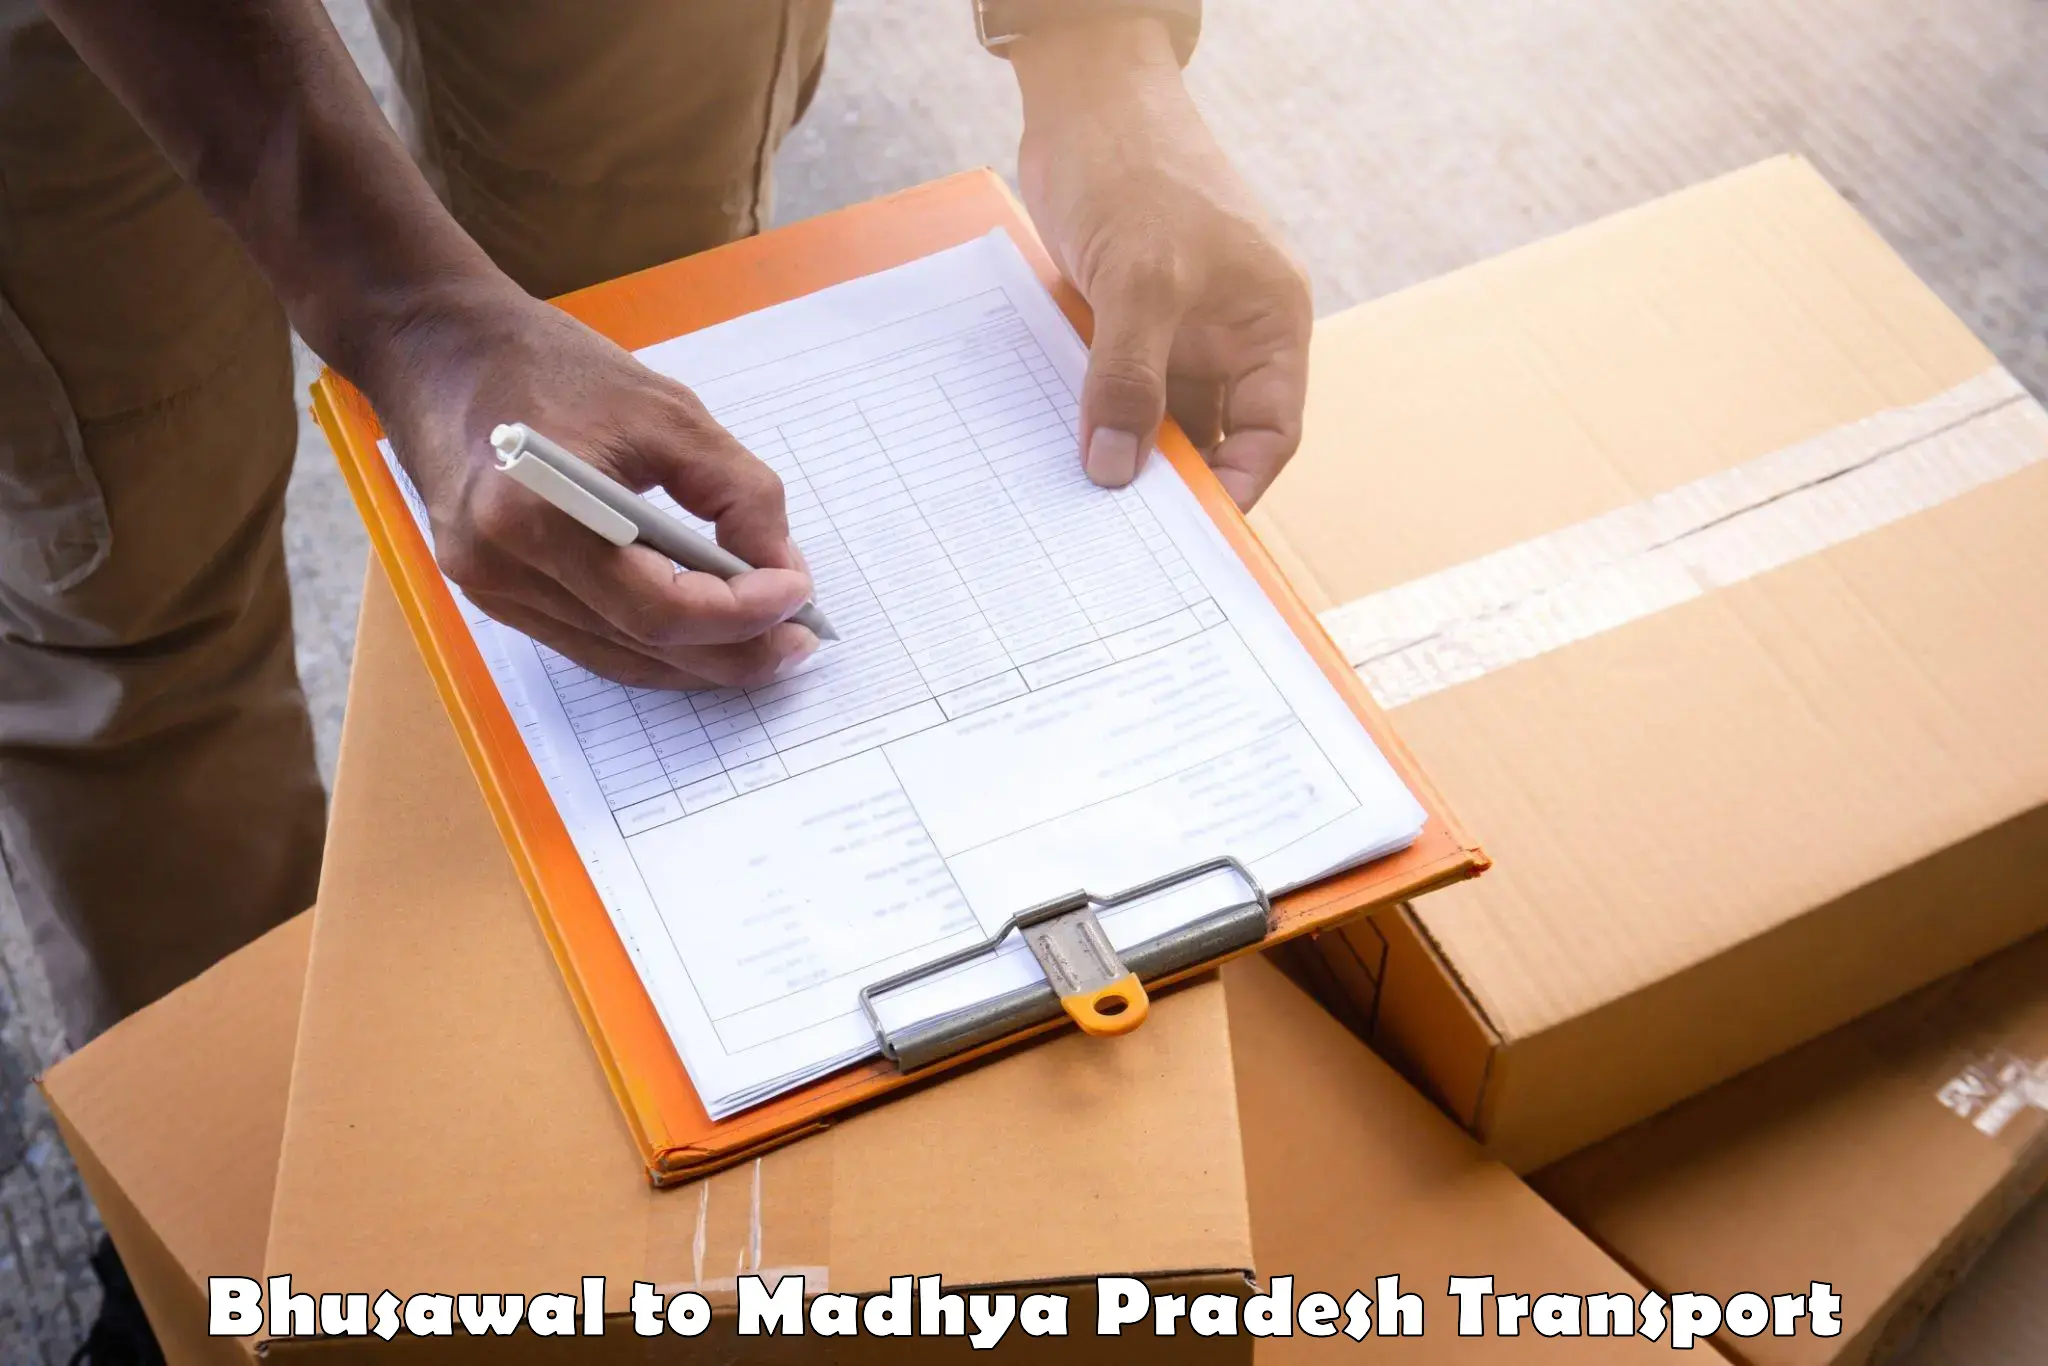 Nationwide transport services Bhusawal to Madwas